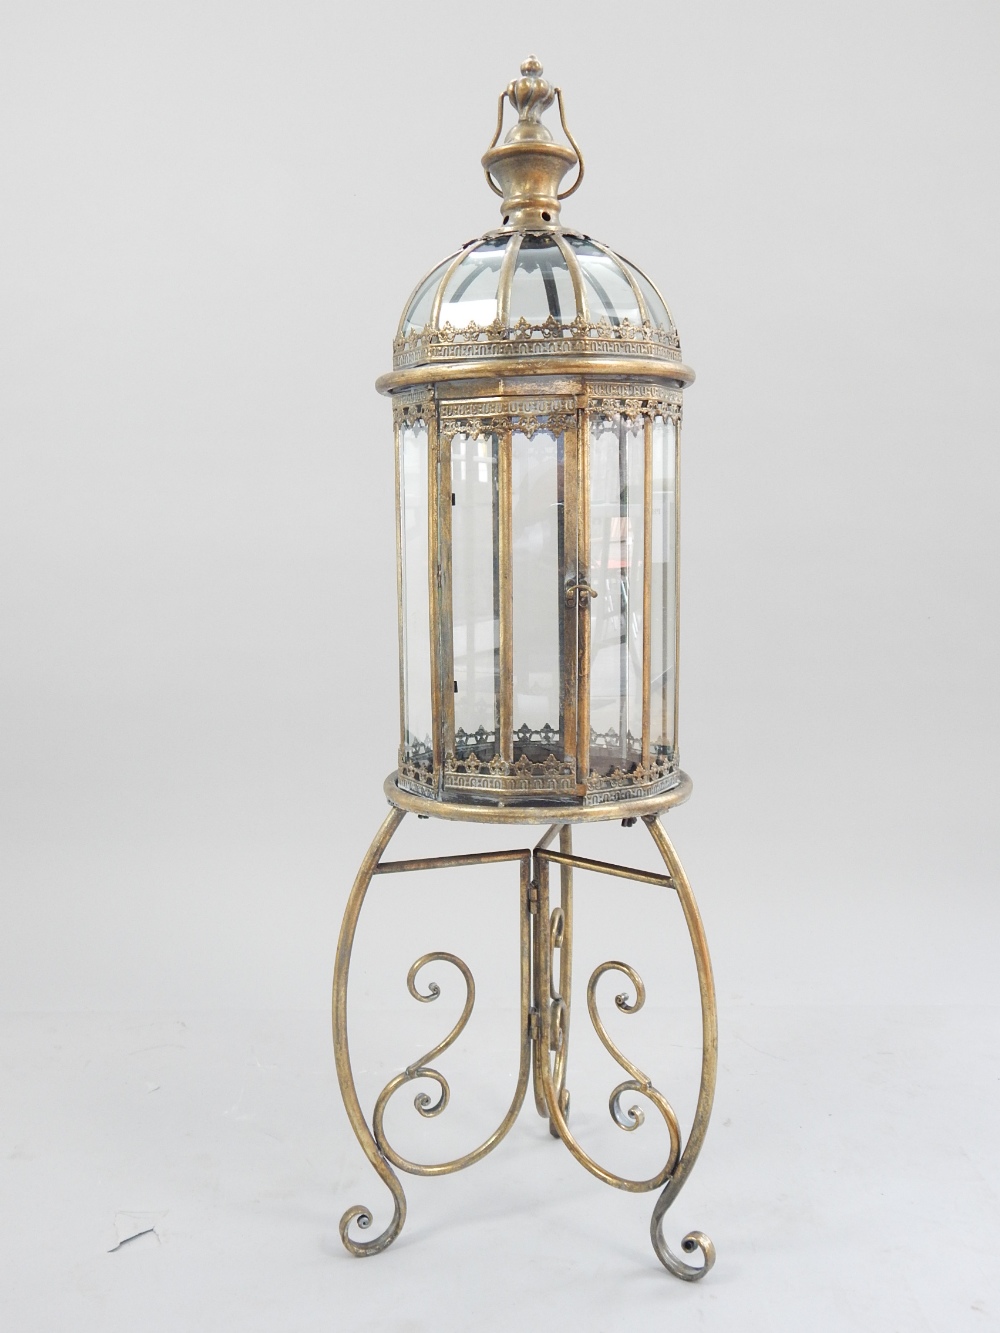 Italian style lantern on stand, domed top and twelve sided body on scroll legs,